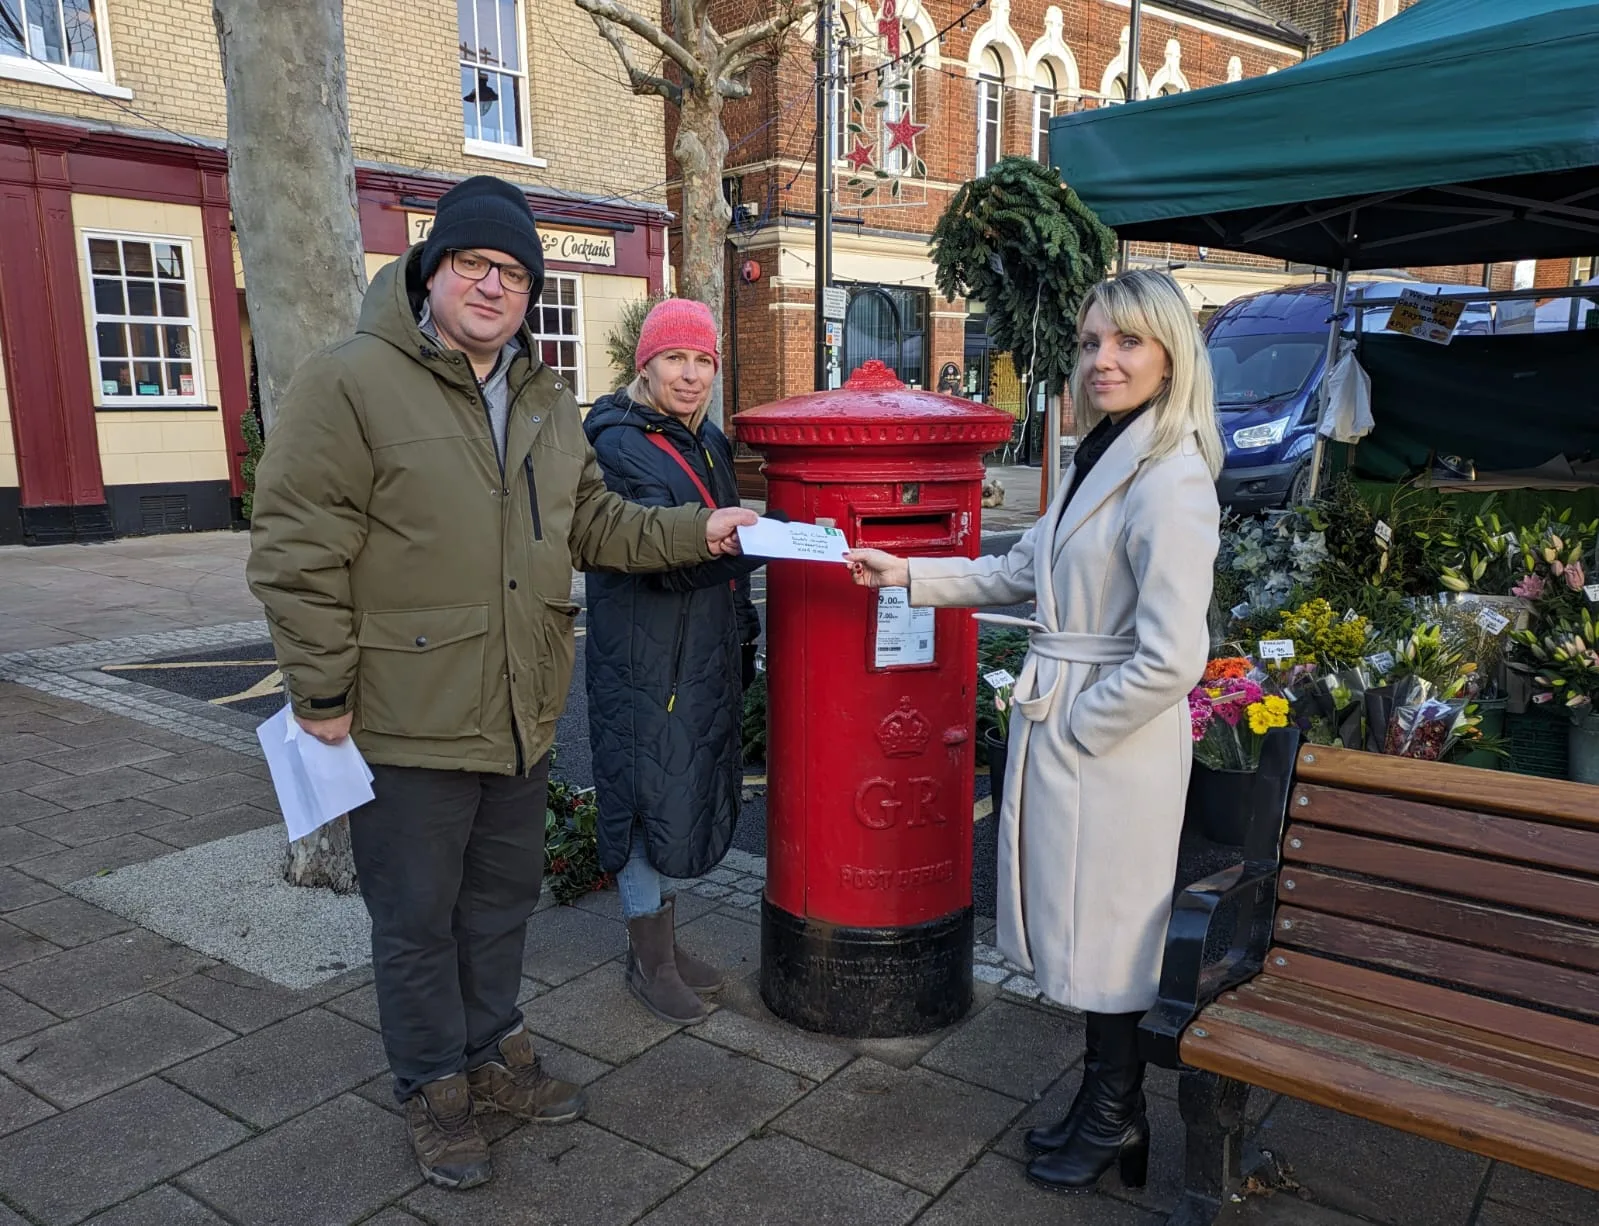 Last Saturday Fenland Parent Power gathered in the centre of March to send a letter to Santa Claus asking him to stop sending bikes to children and instead asking for the elves help to build new cycle paths in the area.